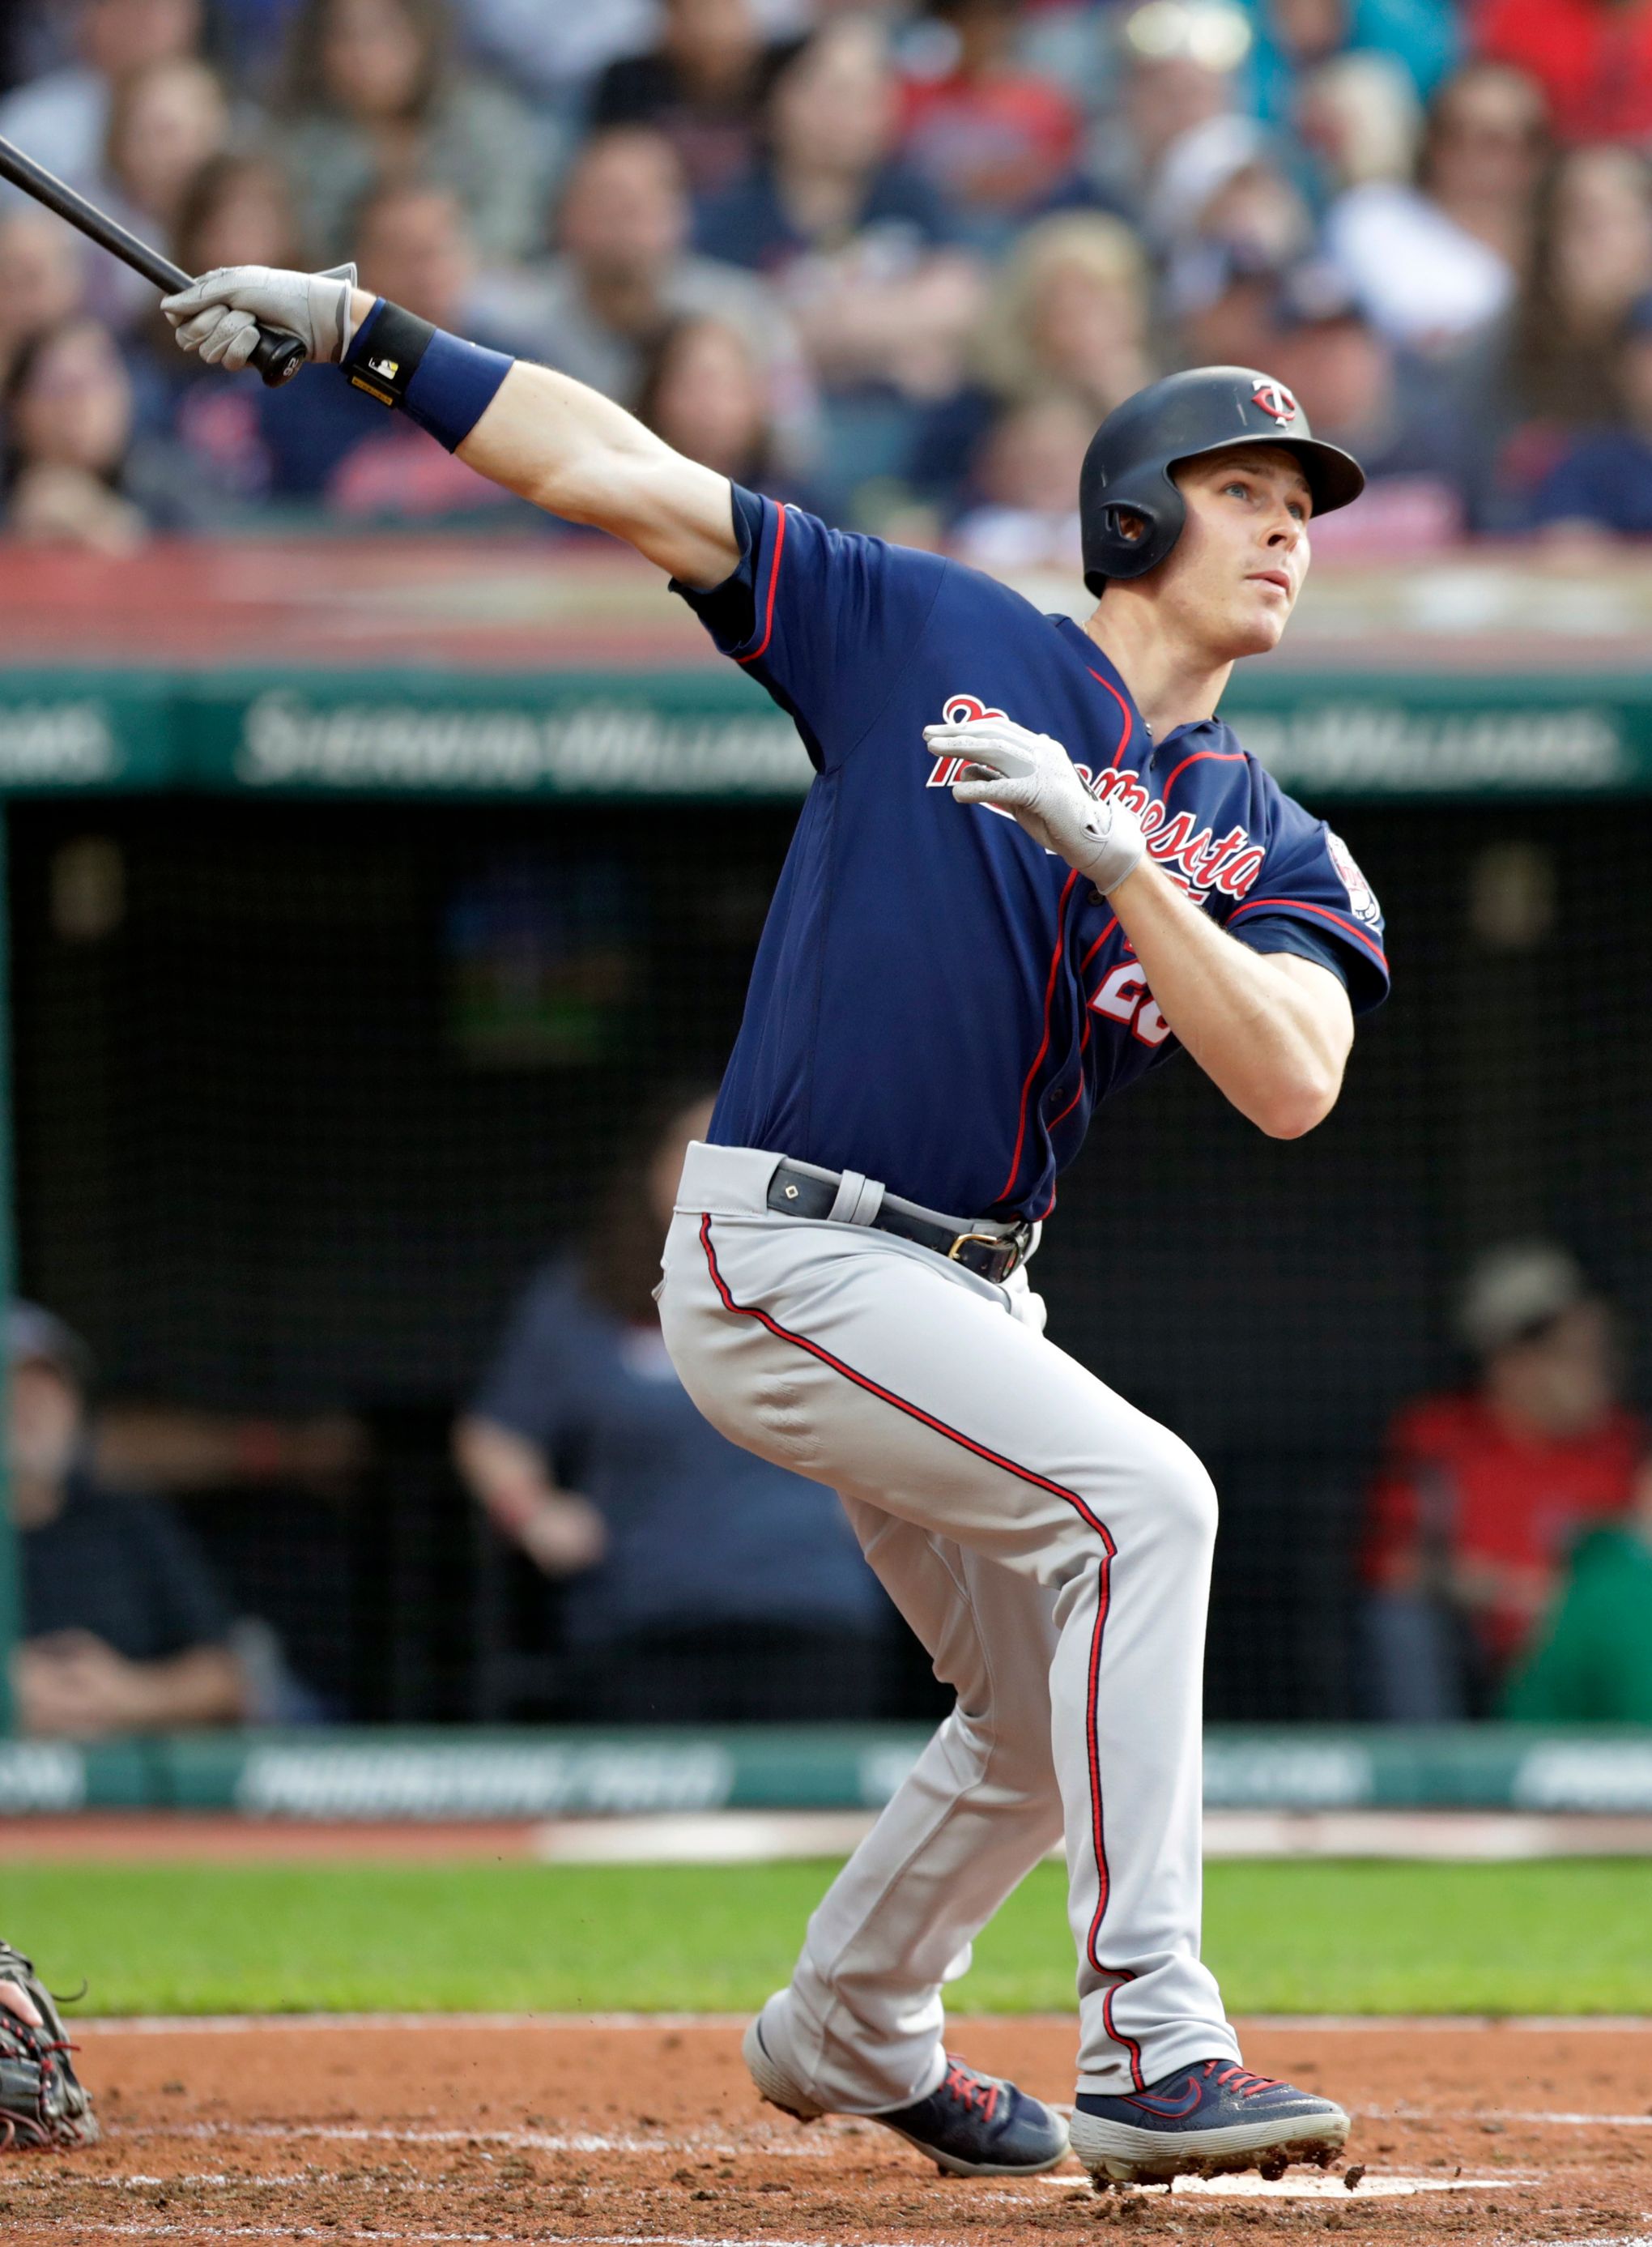 Max Kepler has two home runs tonight! One to each side of the